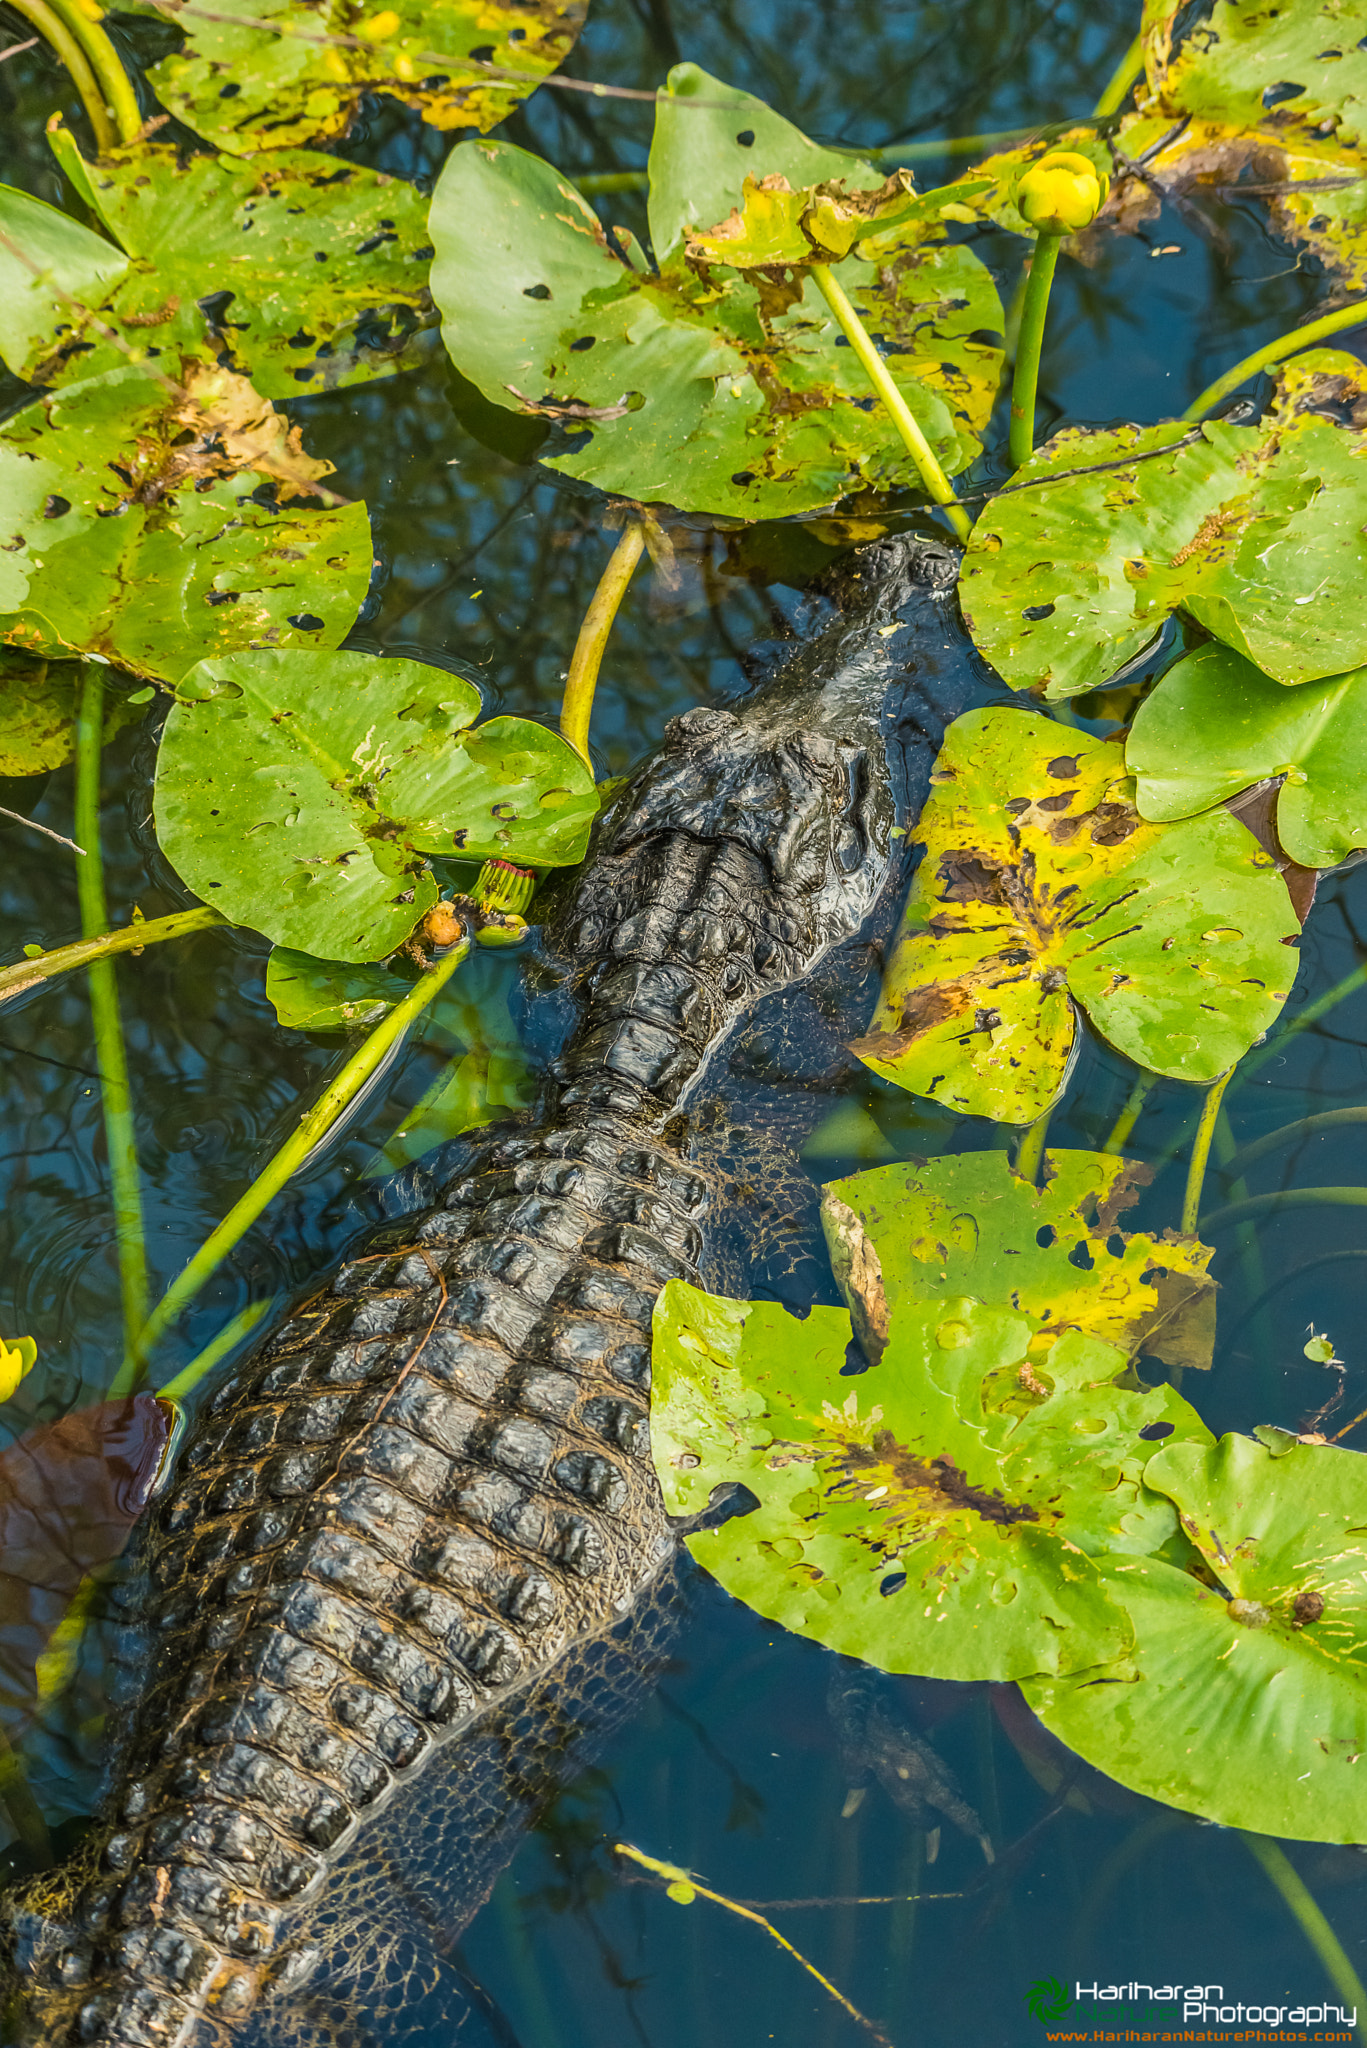 American Alligator from Everglades National Park